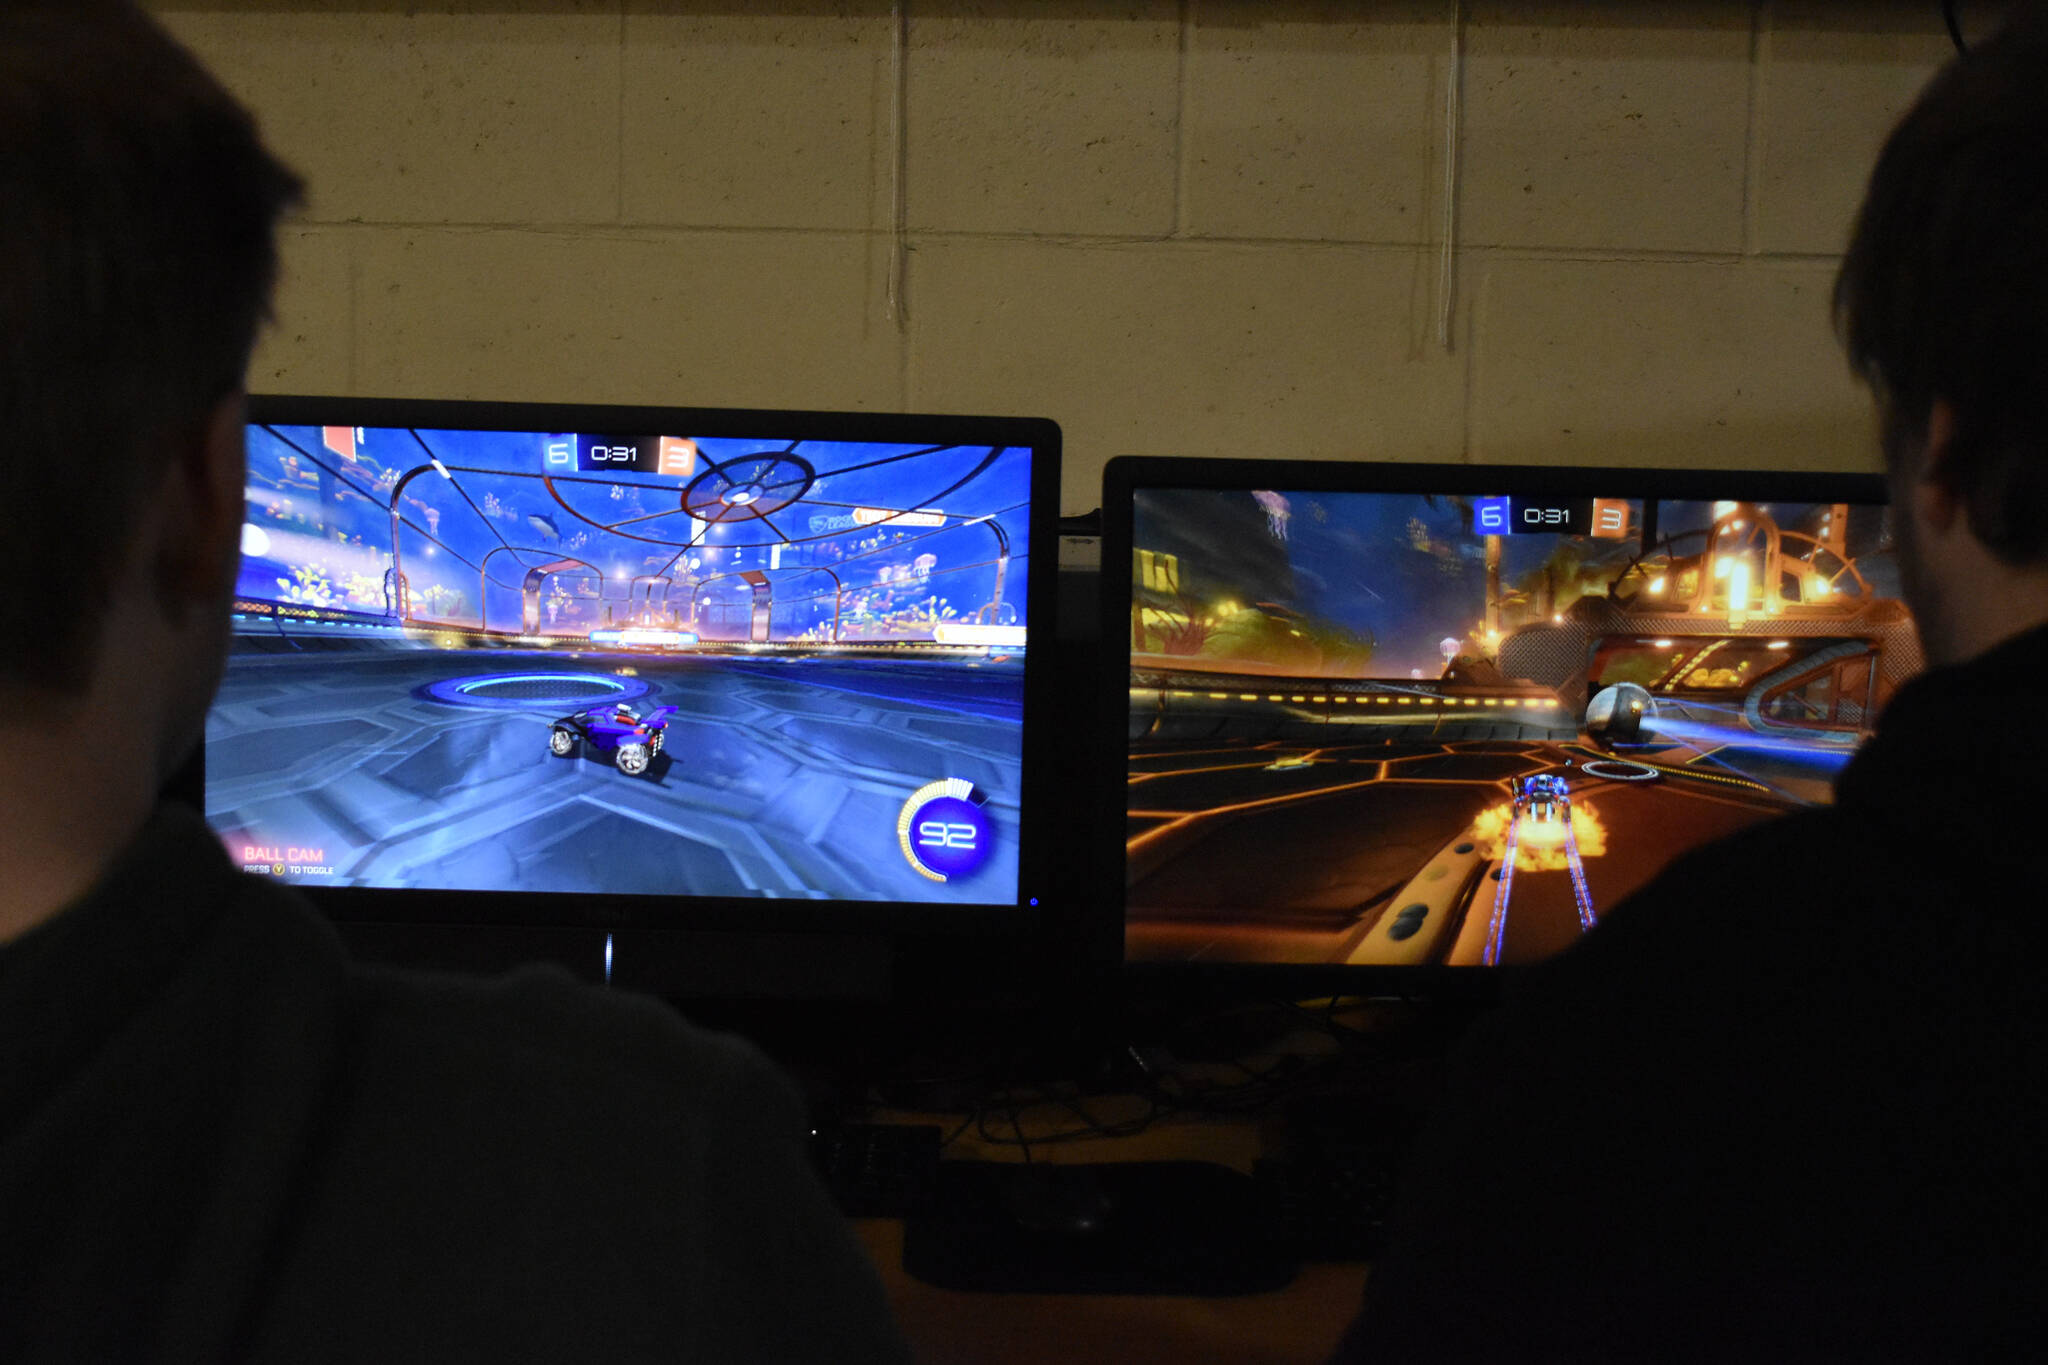 Soldotna High School esports players Graehm LeFevre and Bryce LeFevre participate in a Rocket League practice match on Thursday, Feb. 23, 2023, at Skyview Middle School in Soldotna, Alaska. (Jake Dye/Peninsula Clarion)